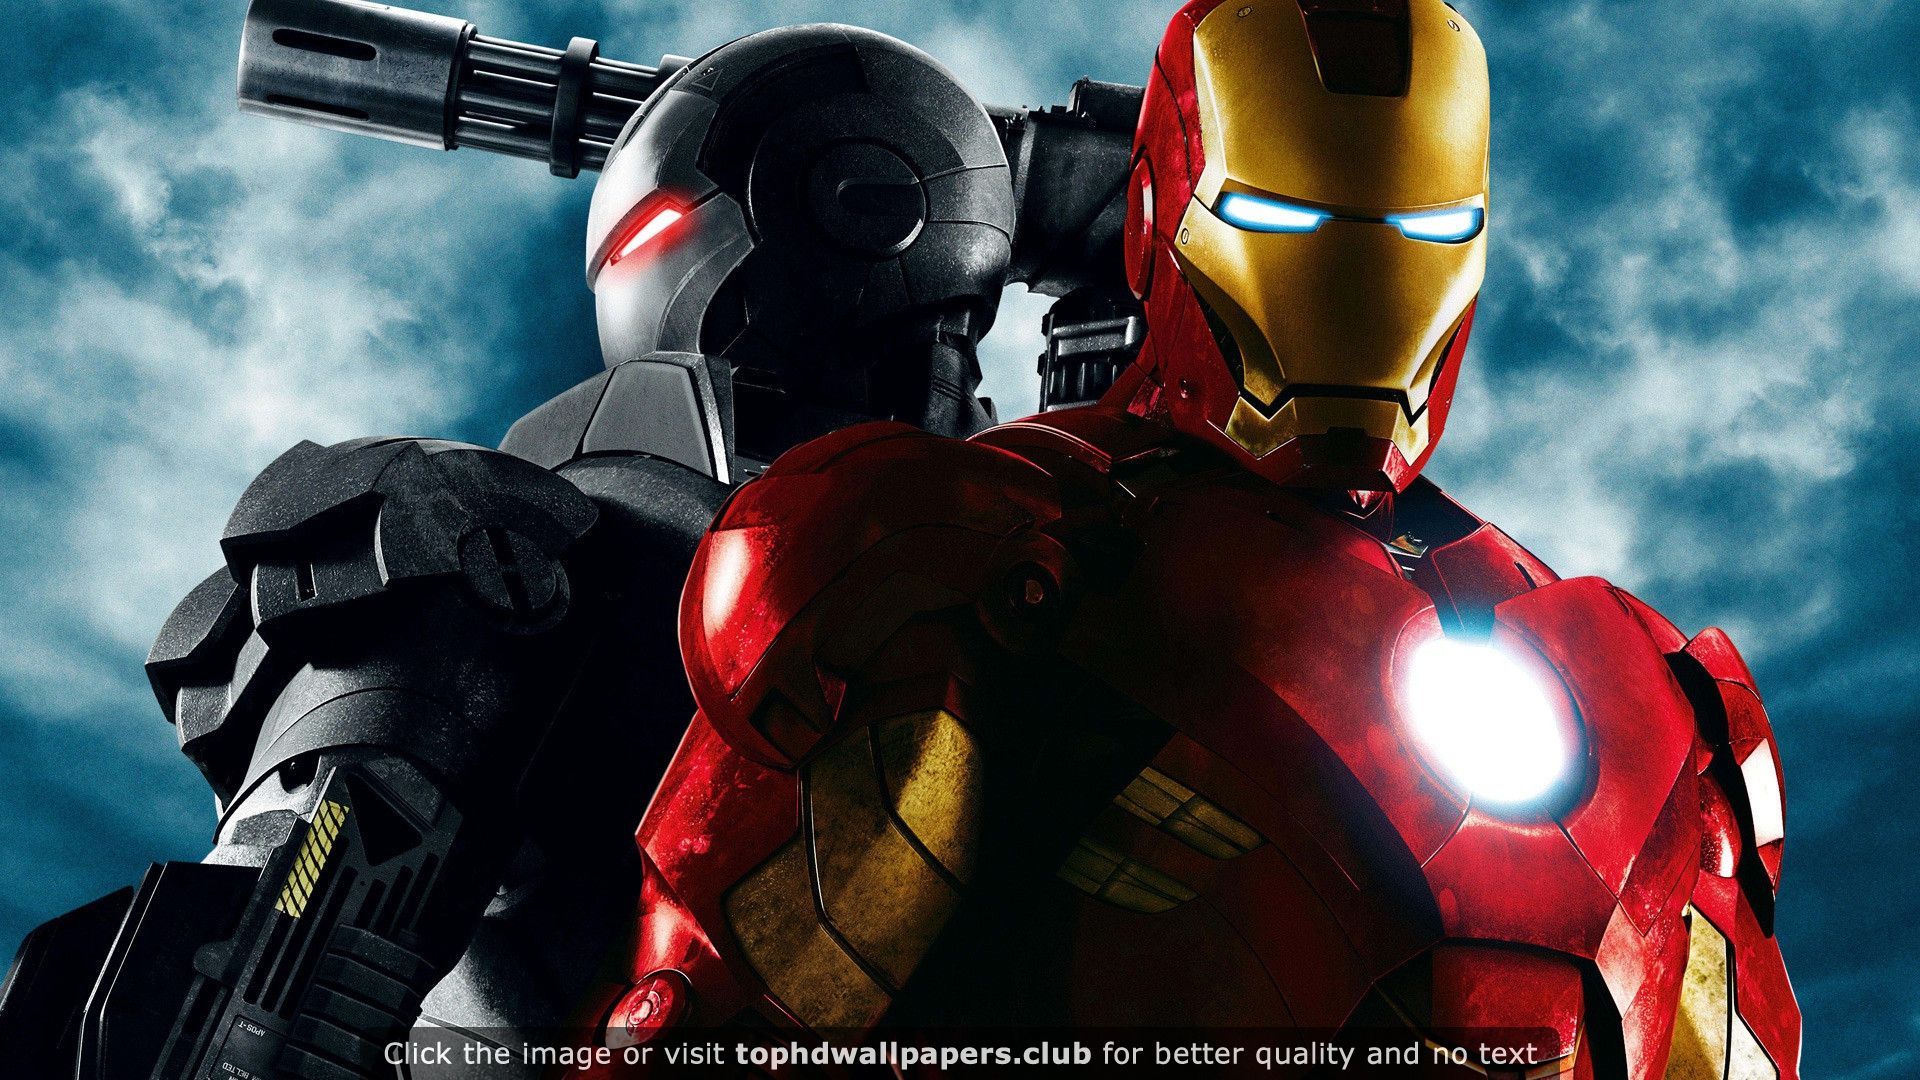 Iron Man 3 Hd 4K or HD wallpaper for your PC, Mac or Mobile device